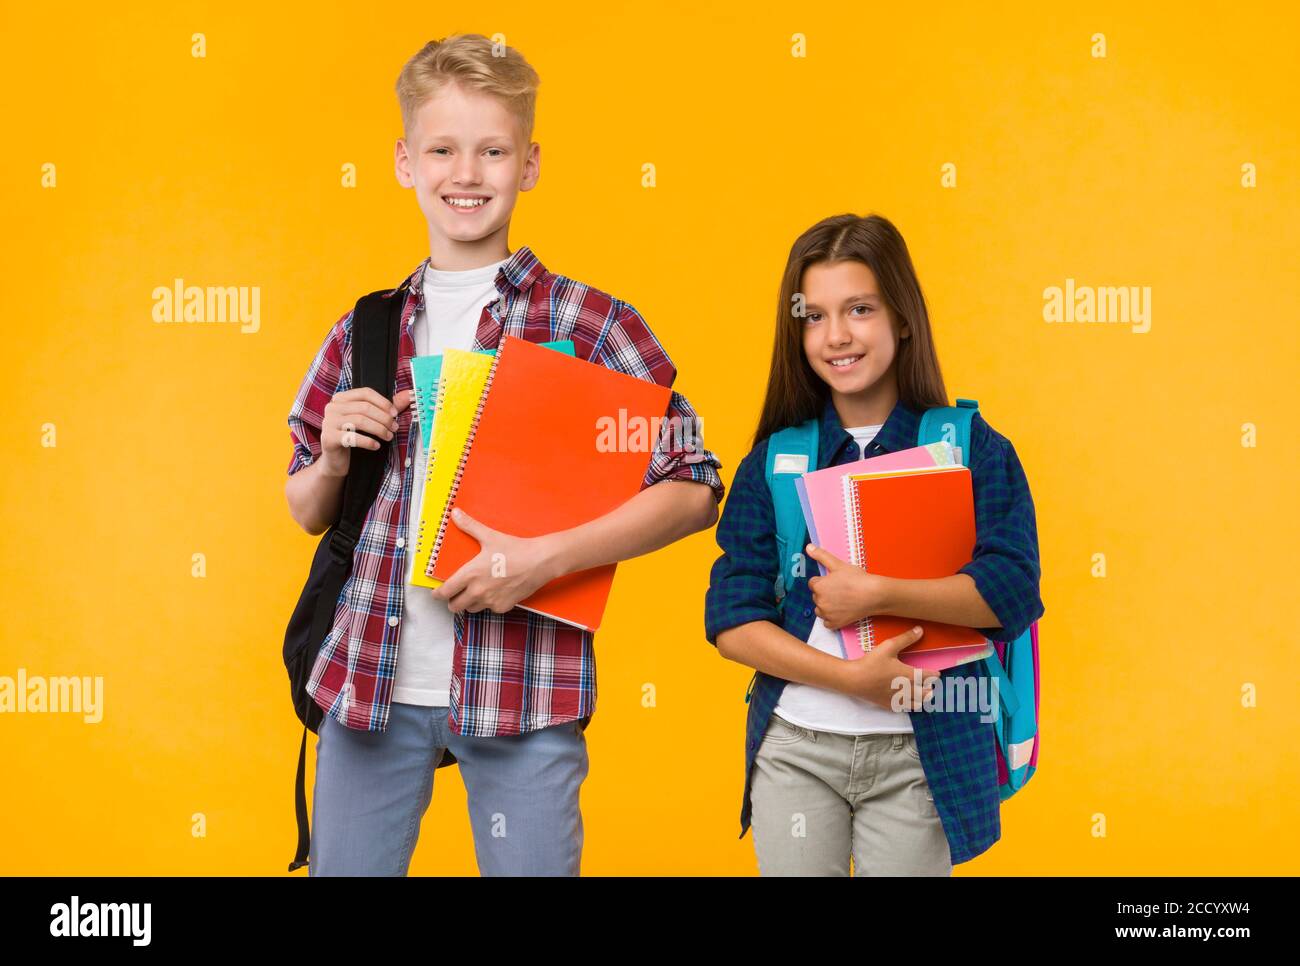 Smiling teens posing with textbooks at studio Stock Photo